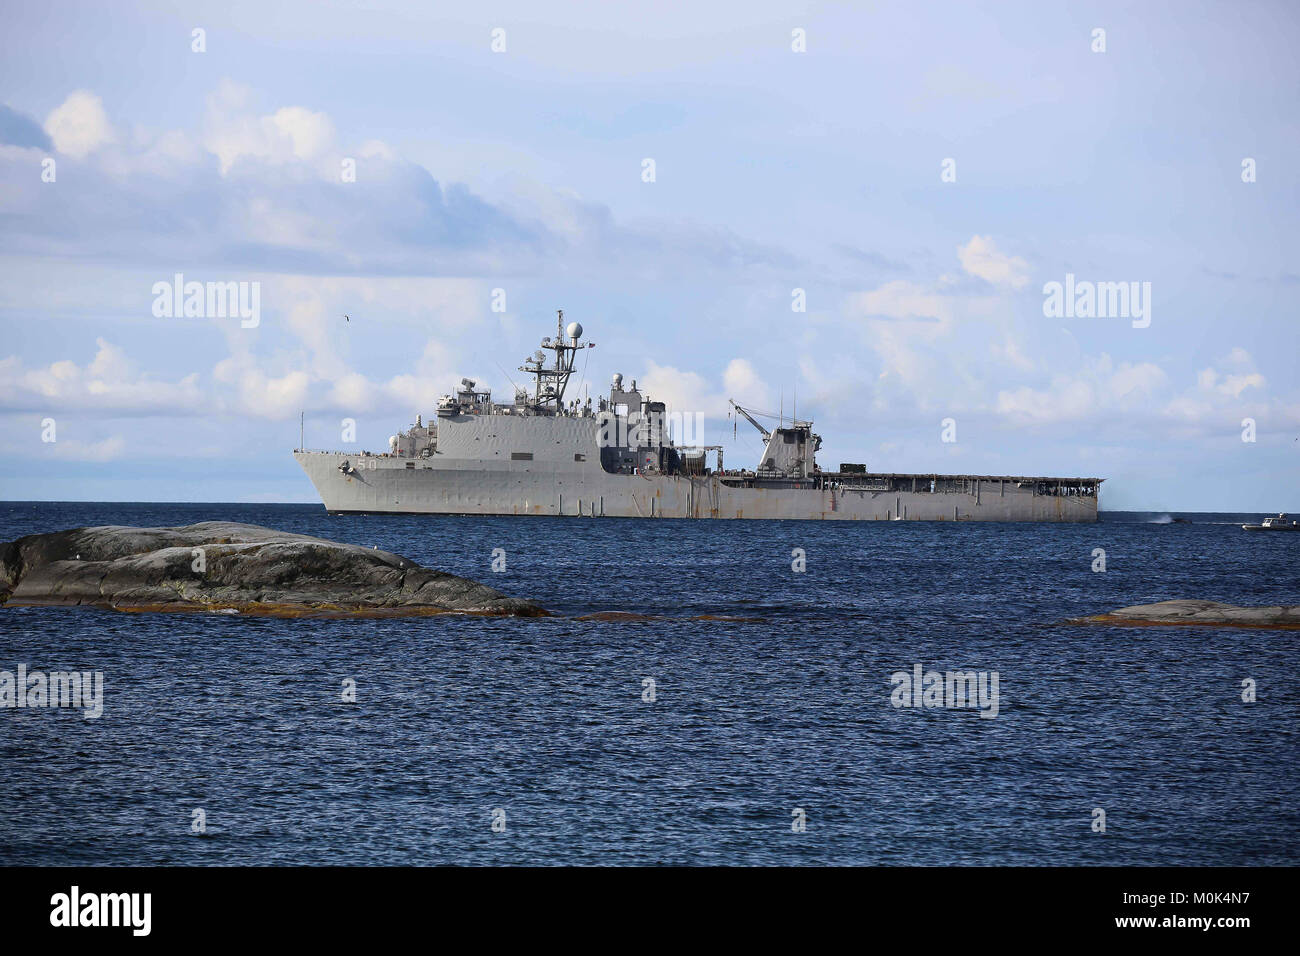 The U.S. Navy Harpers Ferry-class amphibious dock landing ship USS Carter Hall steams underway during exercise BALTOPS June 10, 2016 in the Baltic Sea. Stock Photo